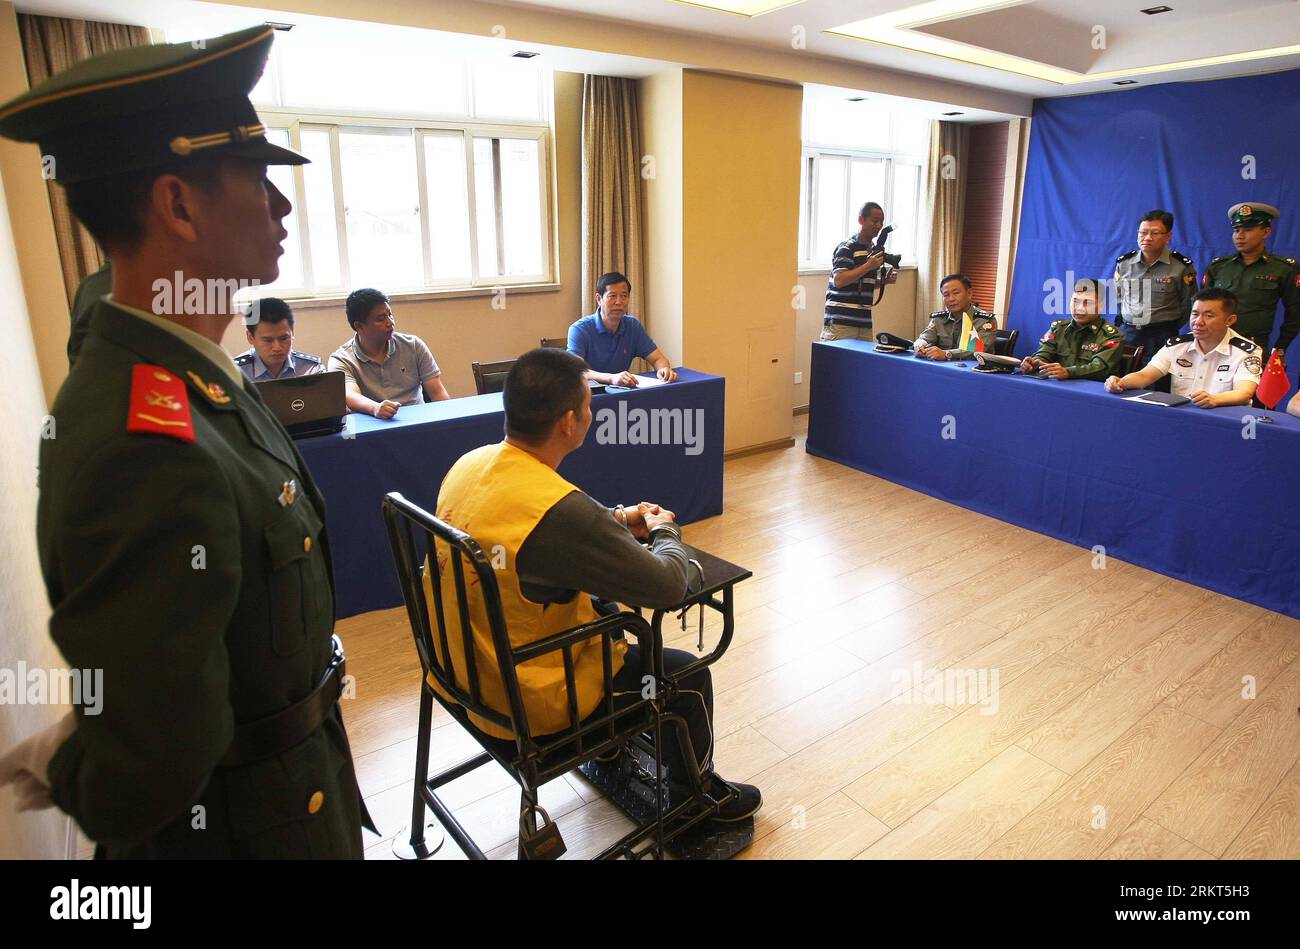 Bildnummer: 58375041  Datum: 22.08.2012  Copyright: imago/Xinhua (120823) -- KUNMING, Aug. 23, 2012 (Xinhua) -- The rights of Naw Kham (2nd L Front), a drug lord suspected of masterminding the murders of 13 Chinese sailors on Oct. 5, 2011, are read during an interrogation held by Chinese and Myanmar military and police officers in Kunming, capital of southwest China s Yunnan Province, Aug. 22, 2012. A team of Myanmar military and police officers arrived Wednesday in Kunming to interrogate Naw Kham, who is believed to be associated with the Mekong River murders in October 2011, at the invitatio Stock Photo